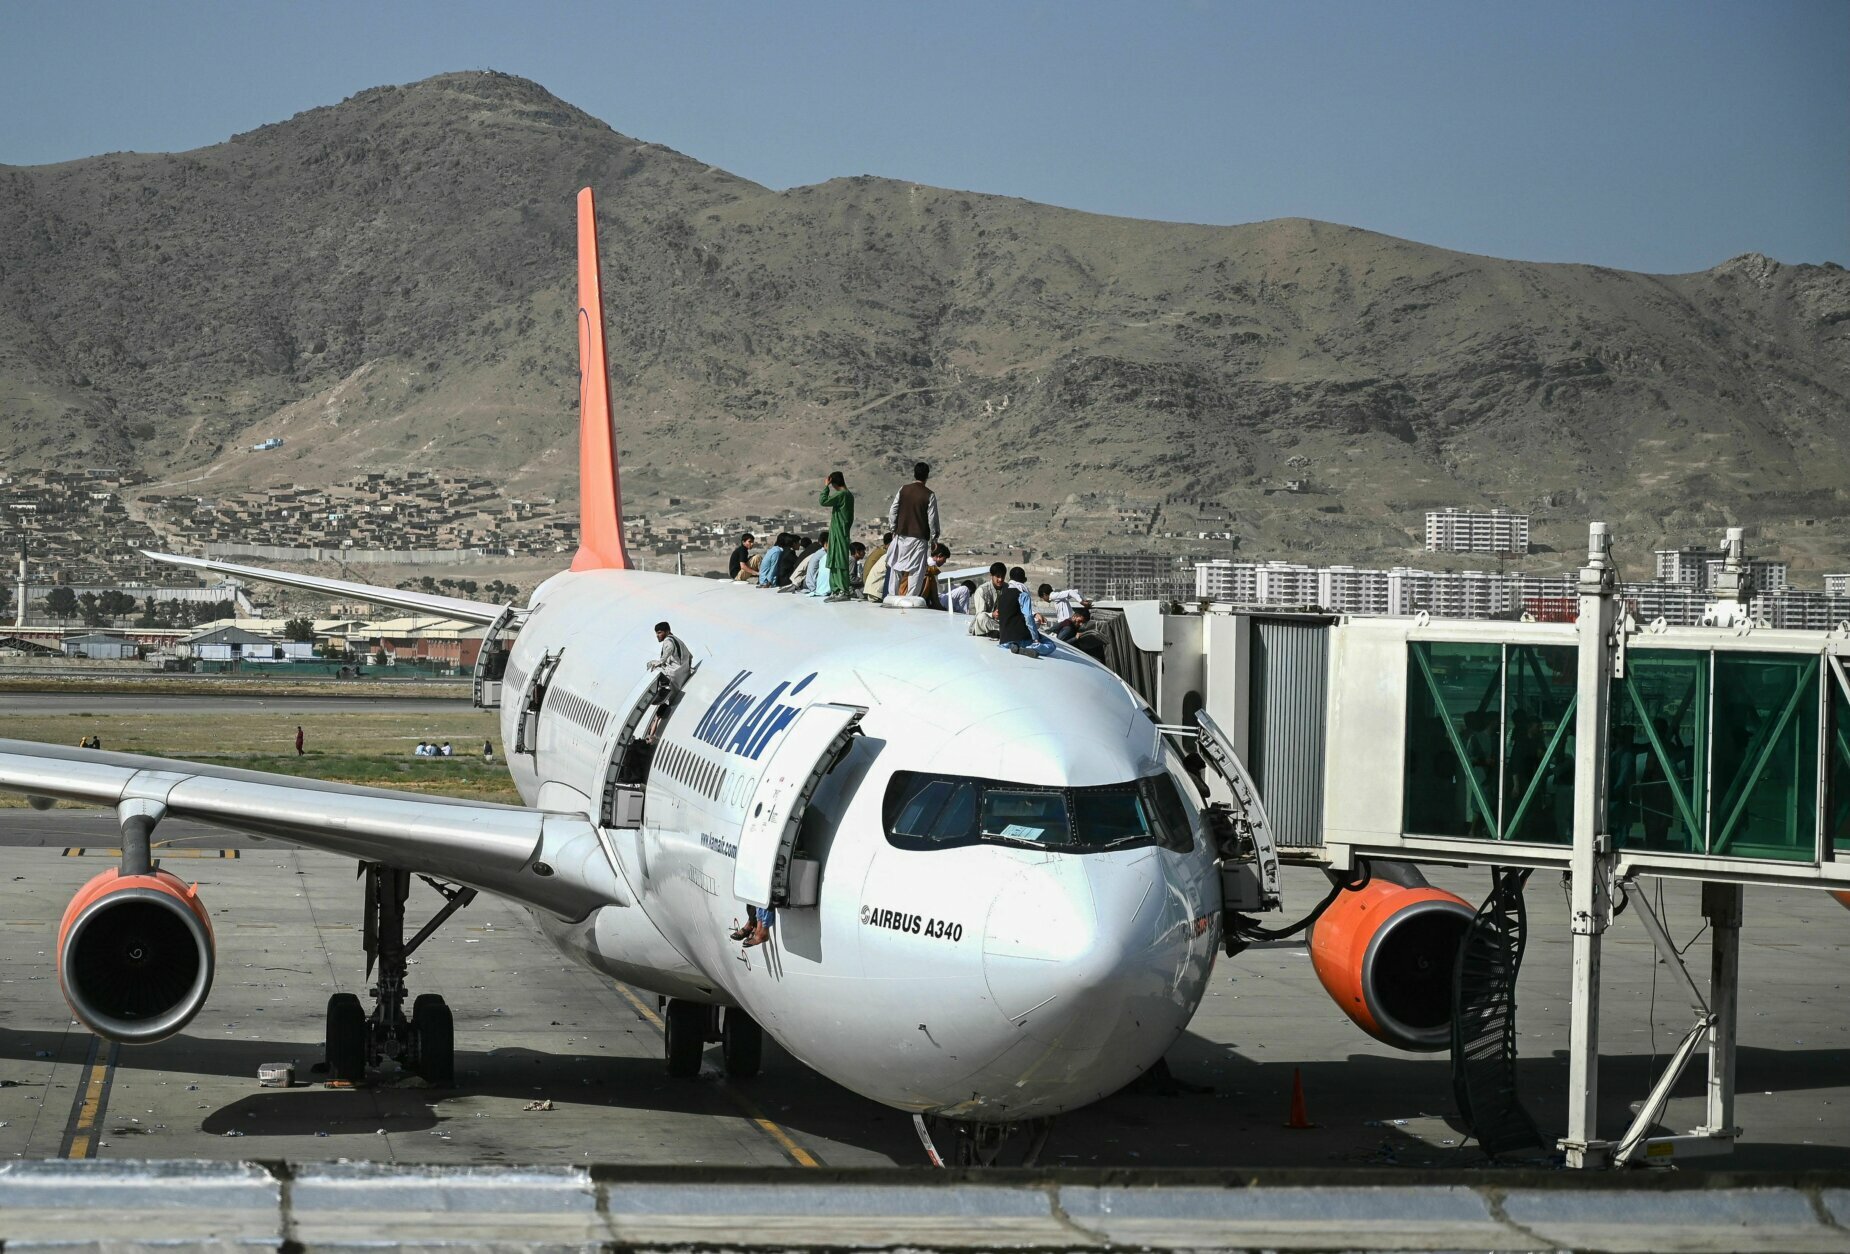 Afghan people climb atop a plane as they wait at the Kabul airport in Kabul on August 16, 2021, after a stunningly swift end to Afghanistan's 20-year war, as thousands of people mobbed the city's airport trying to flee the group's feared hardline brand of Islamist rule. (Photo by Wakil Kohsar / AFP) (Photo by WAKIL KOHSAR/AFP via Getty Images)